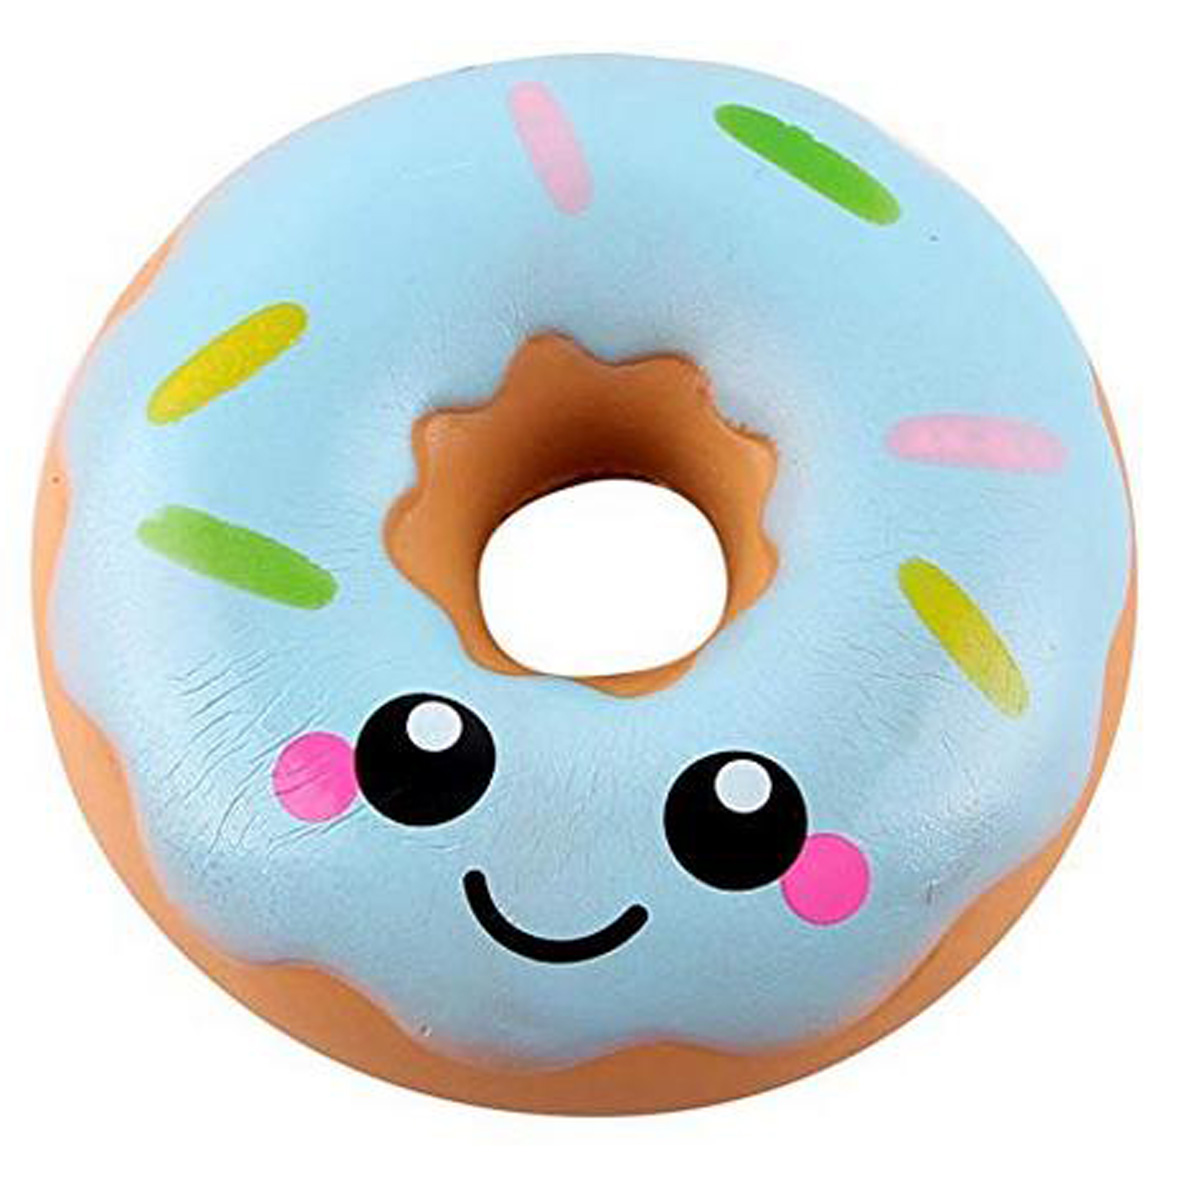 GL-ELY1045 Stress Relievers Donut Toy